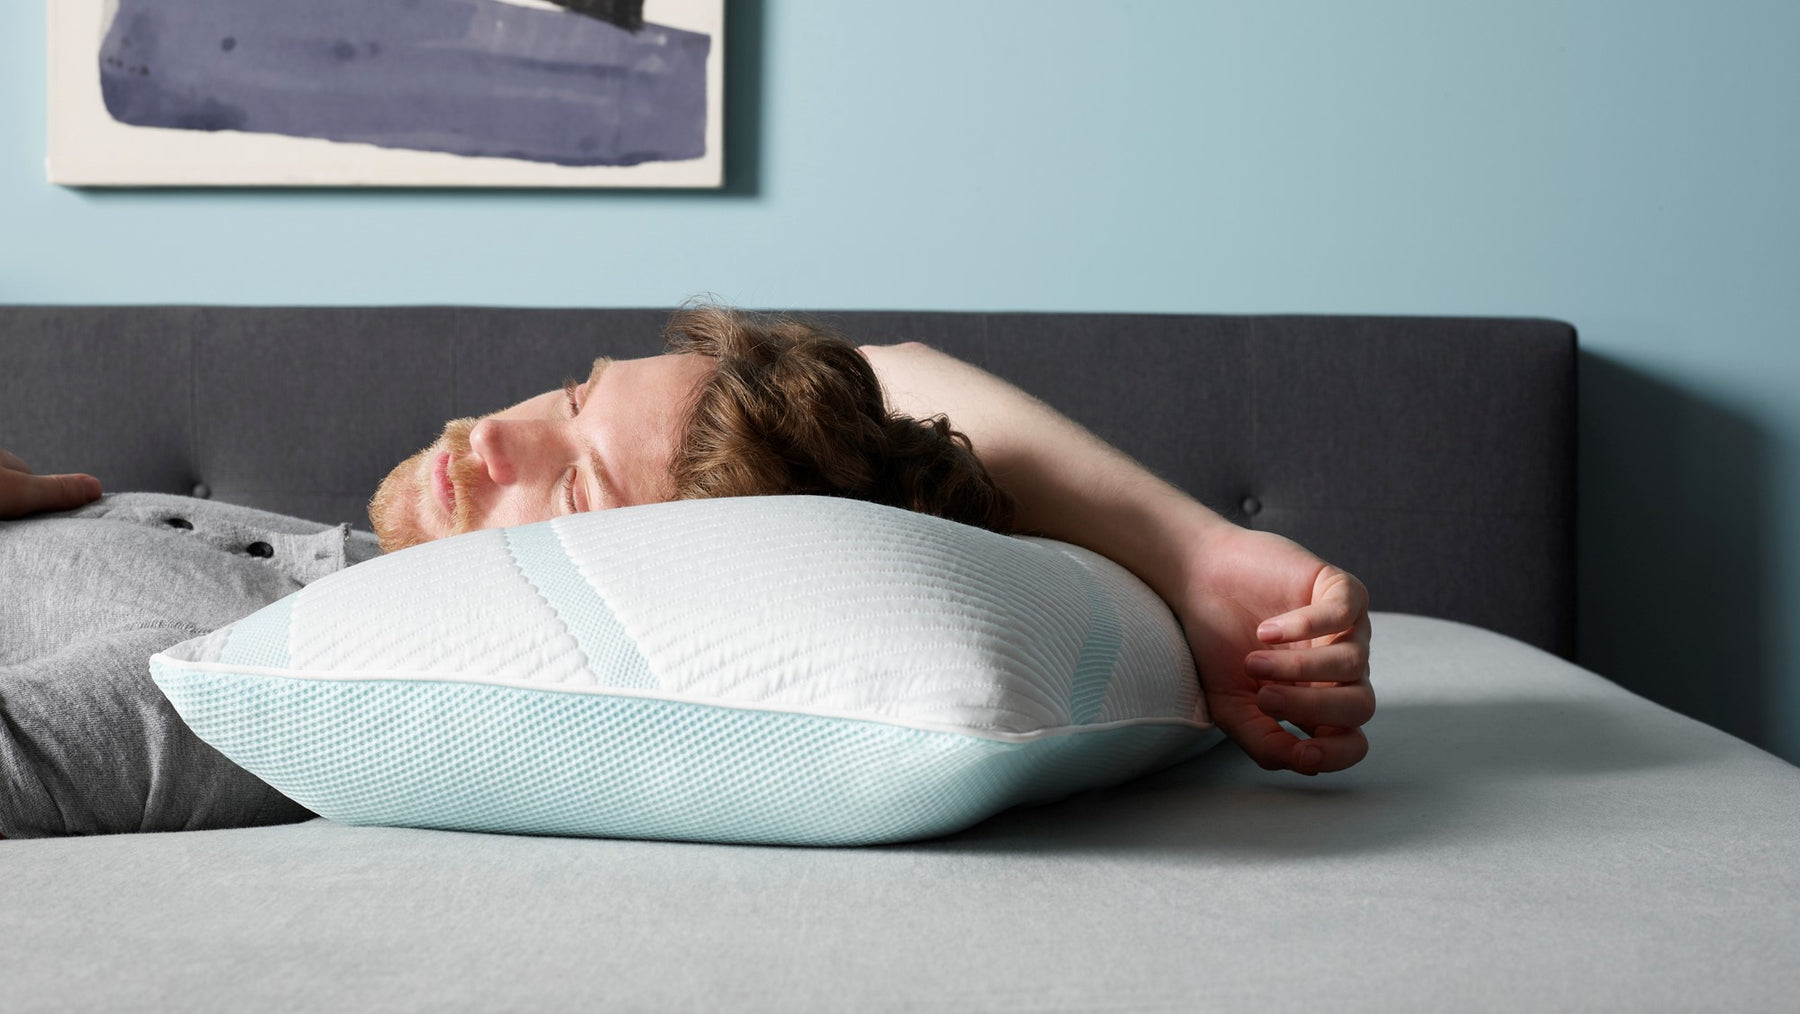 Man laying on a Tempur Pedic bed and pillow